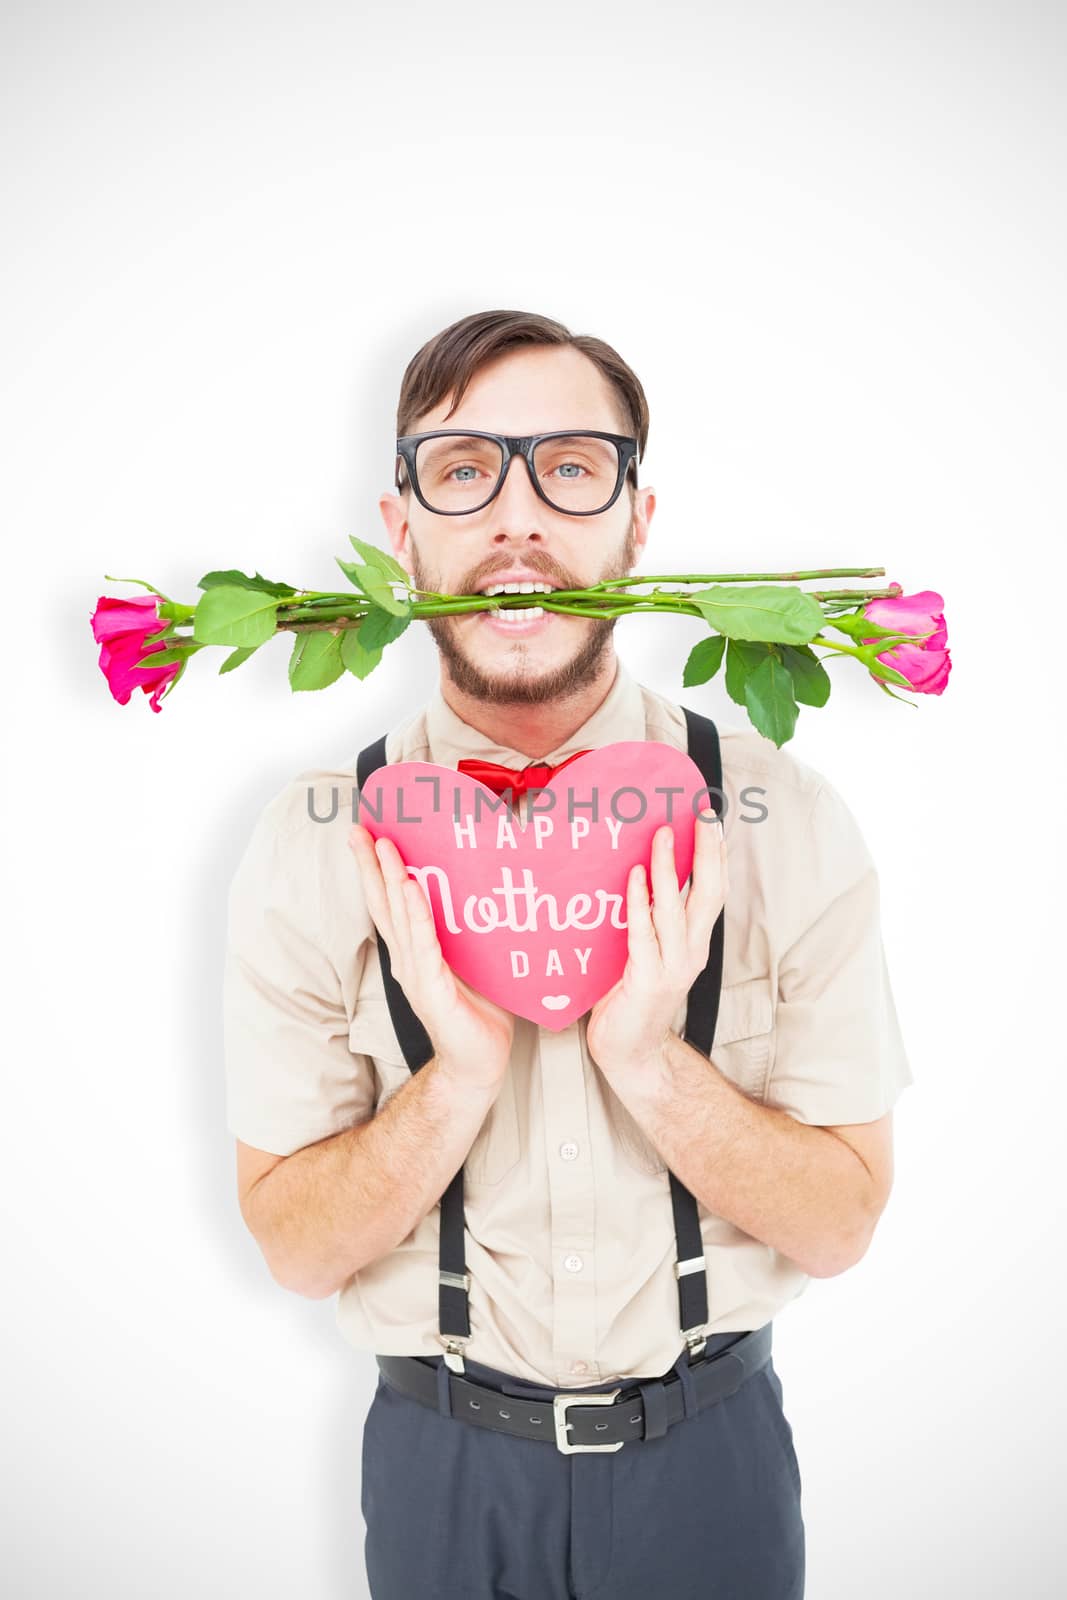 Geeky hipster offering valentines gifts against mothers day greeting